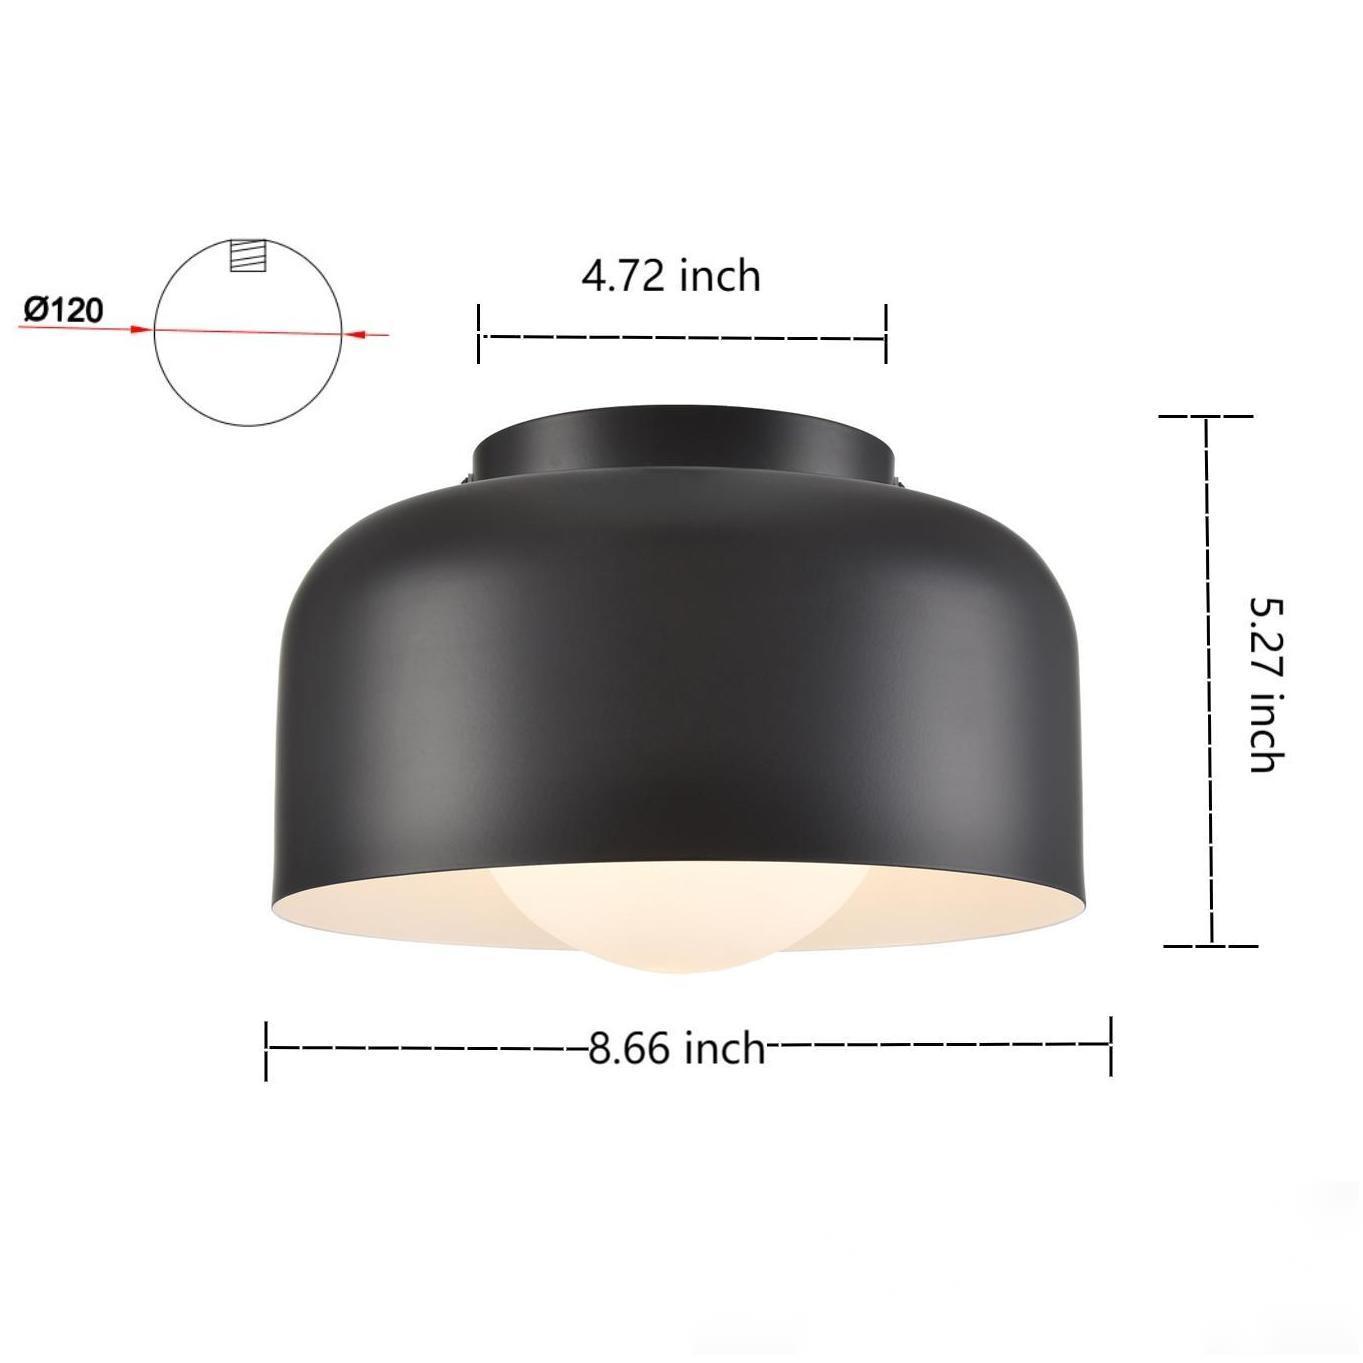 Industrial Semi-Gloss Black Ceiling Light Fixture Rustic Barn Design Semi Flush Mount Ceiling Lights for Kitchen Dining Room Hallway Porch Foyer Entryway Laundry